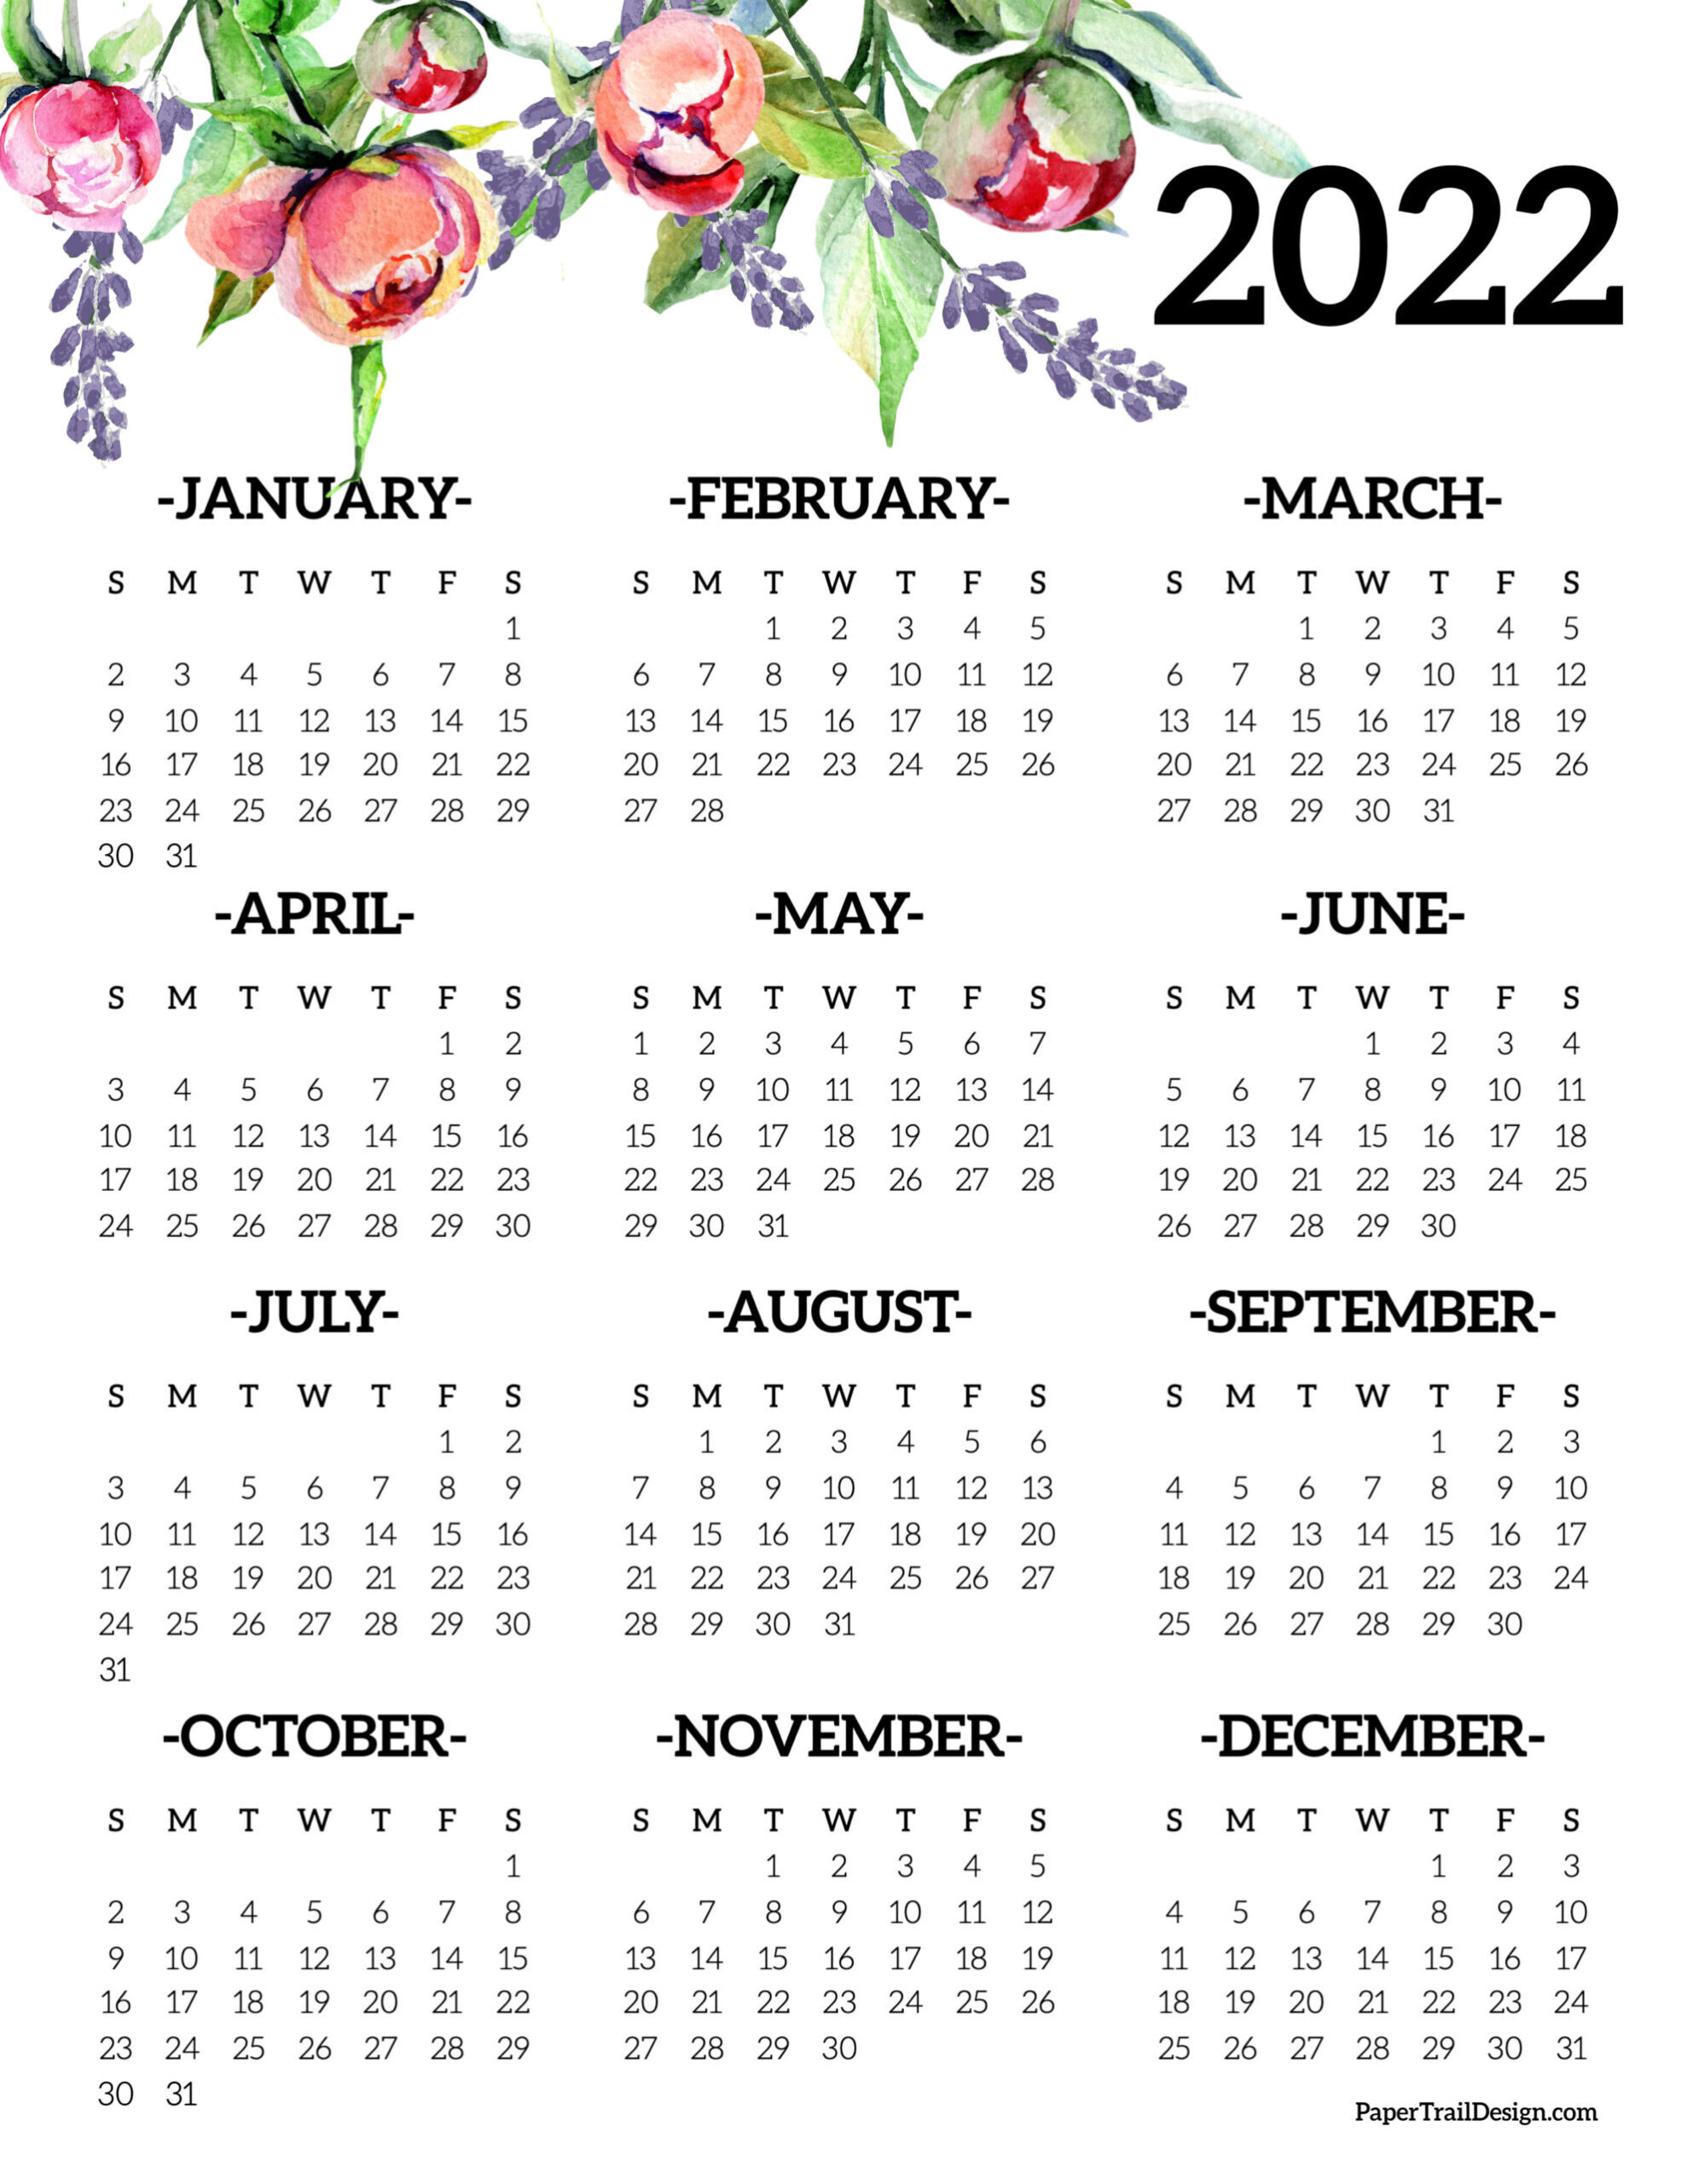 Calendar 2022 Printable One Page - Paper Trail Design  Free Printable Calendar 2022 Year At A Glance